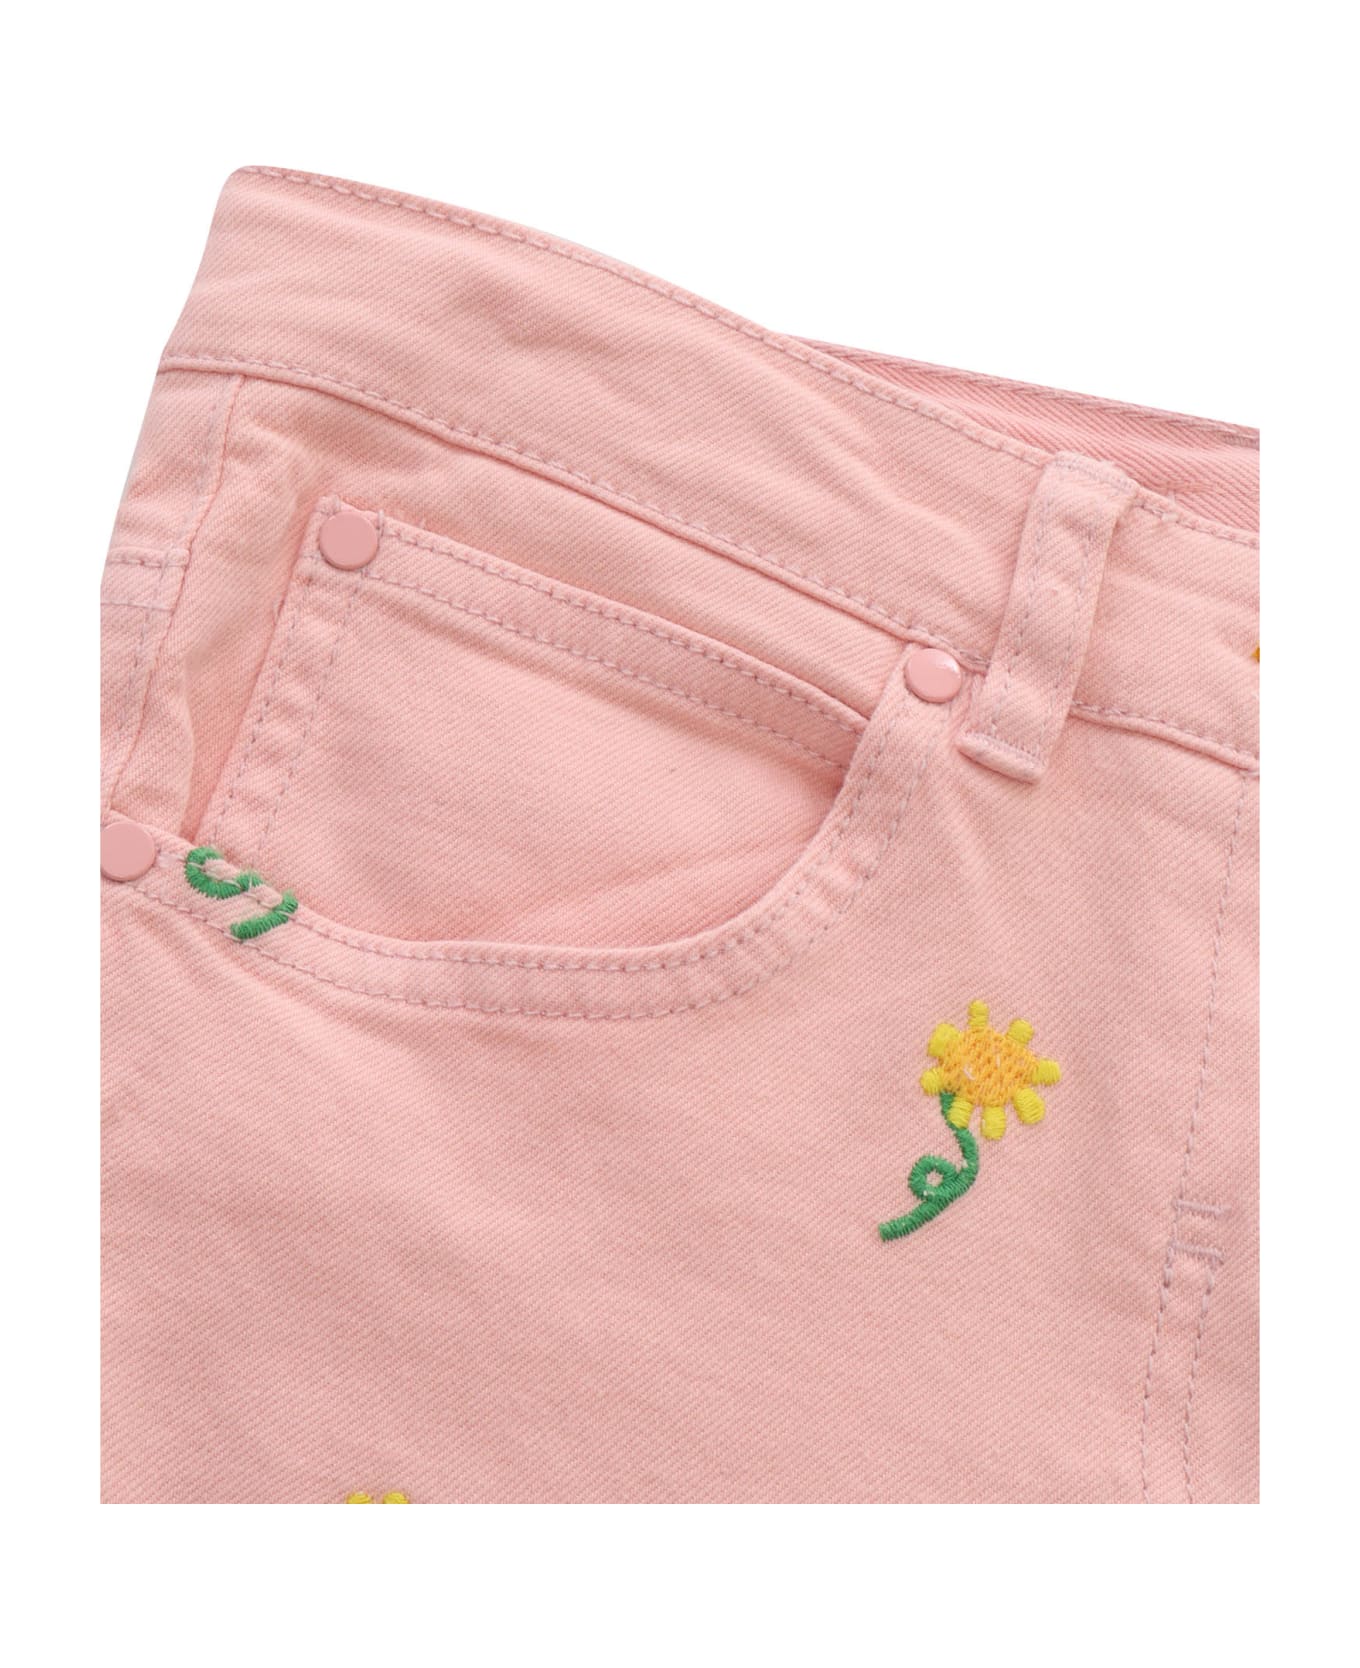 Stella McCartney Kids Pink Jeans With Flowers - PINK ボトムス